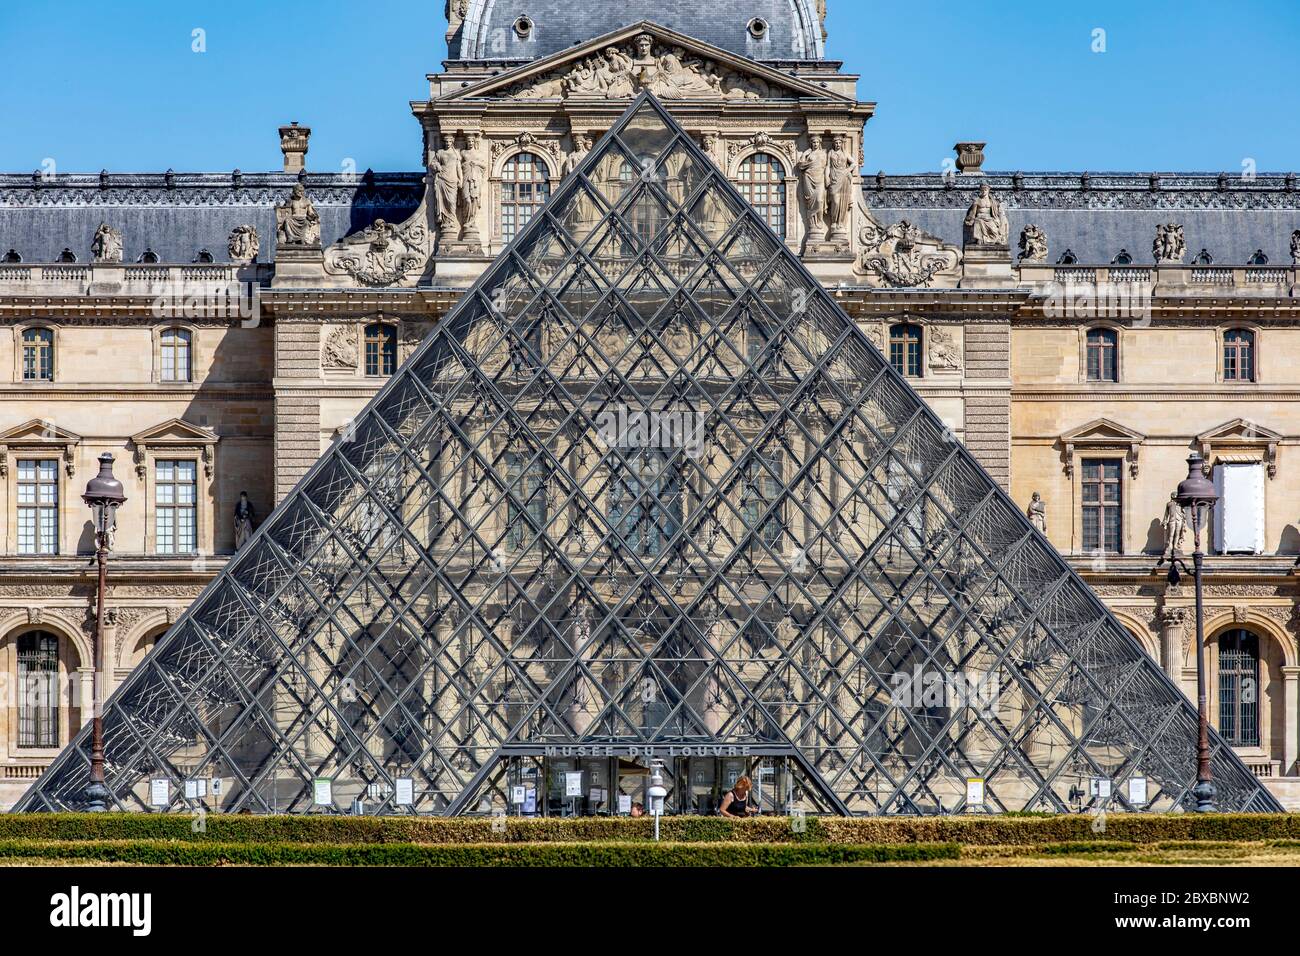 Paris, France - May 29, 2020: Louvre museum as seen from Jardin des Tuileries in Paris Stock Photo